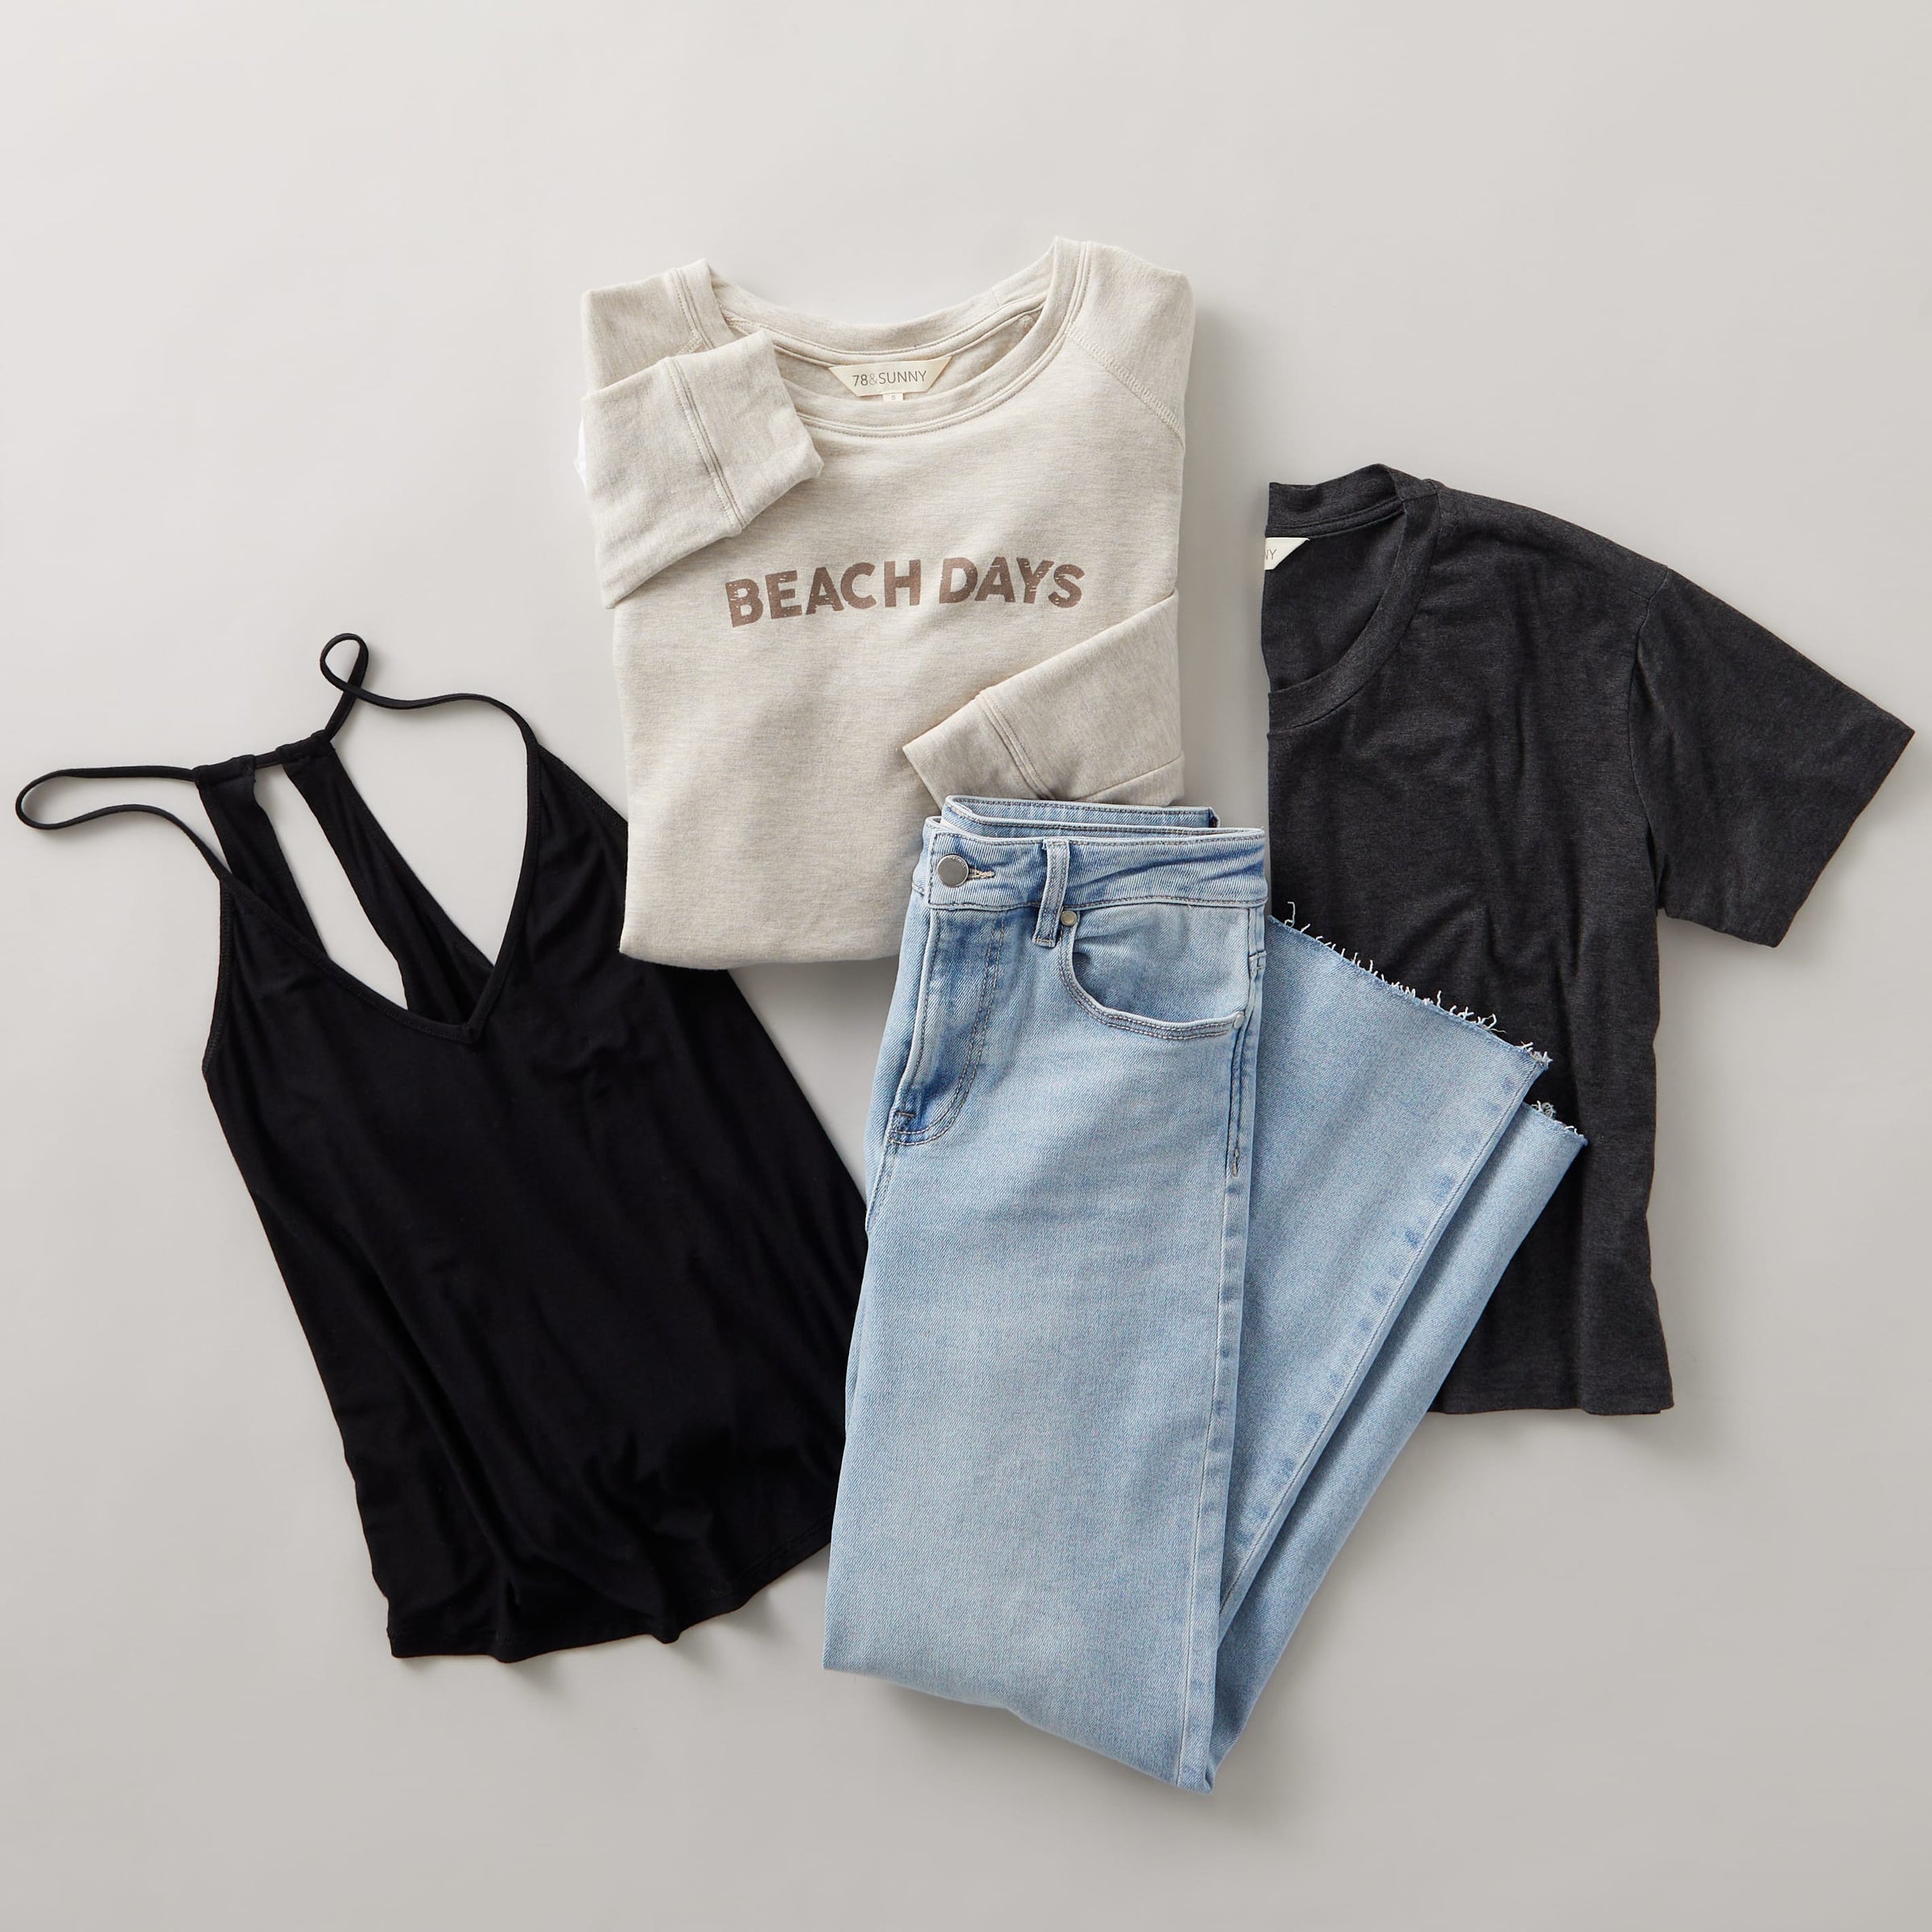 A black tank top, light wash jeans, a tan sweatshirt and a tee shirt laying stacked on a white background.